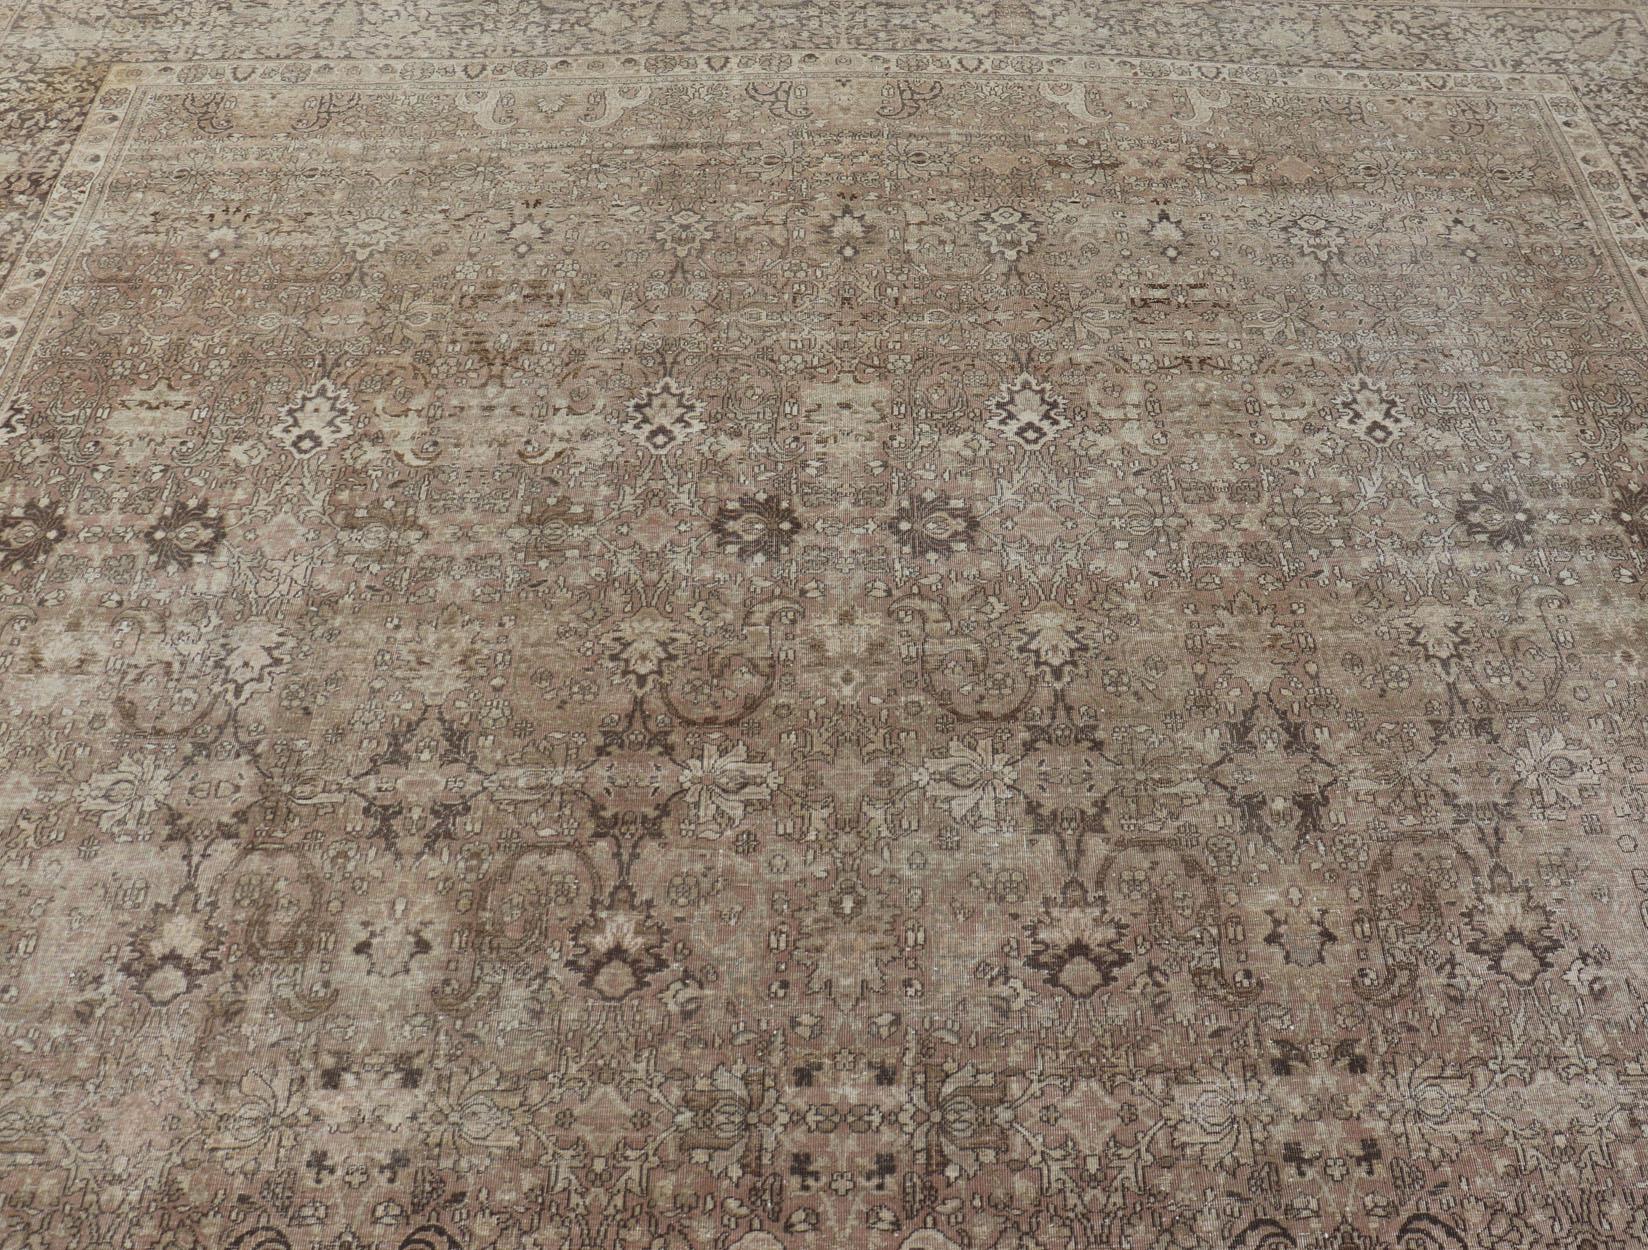 Large Antique Turkish Sivas Rug with Floral Design in Earthy Neutral Tones  For Sale 5